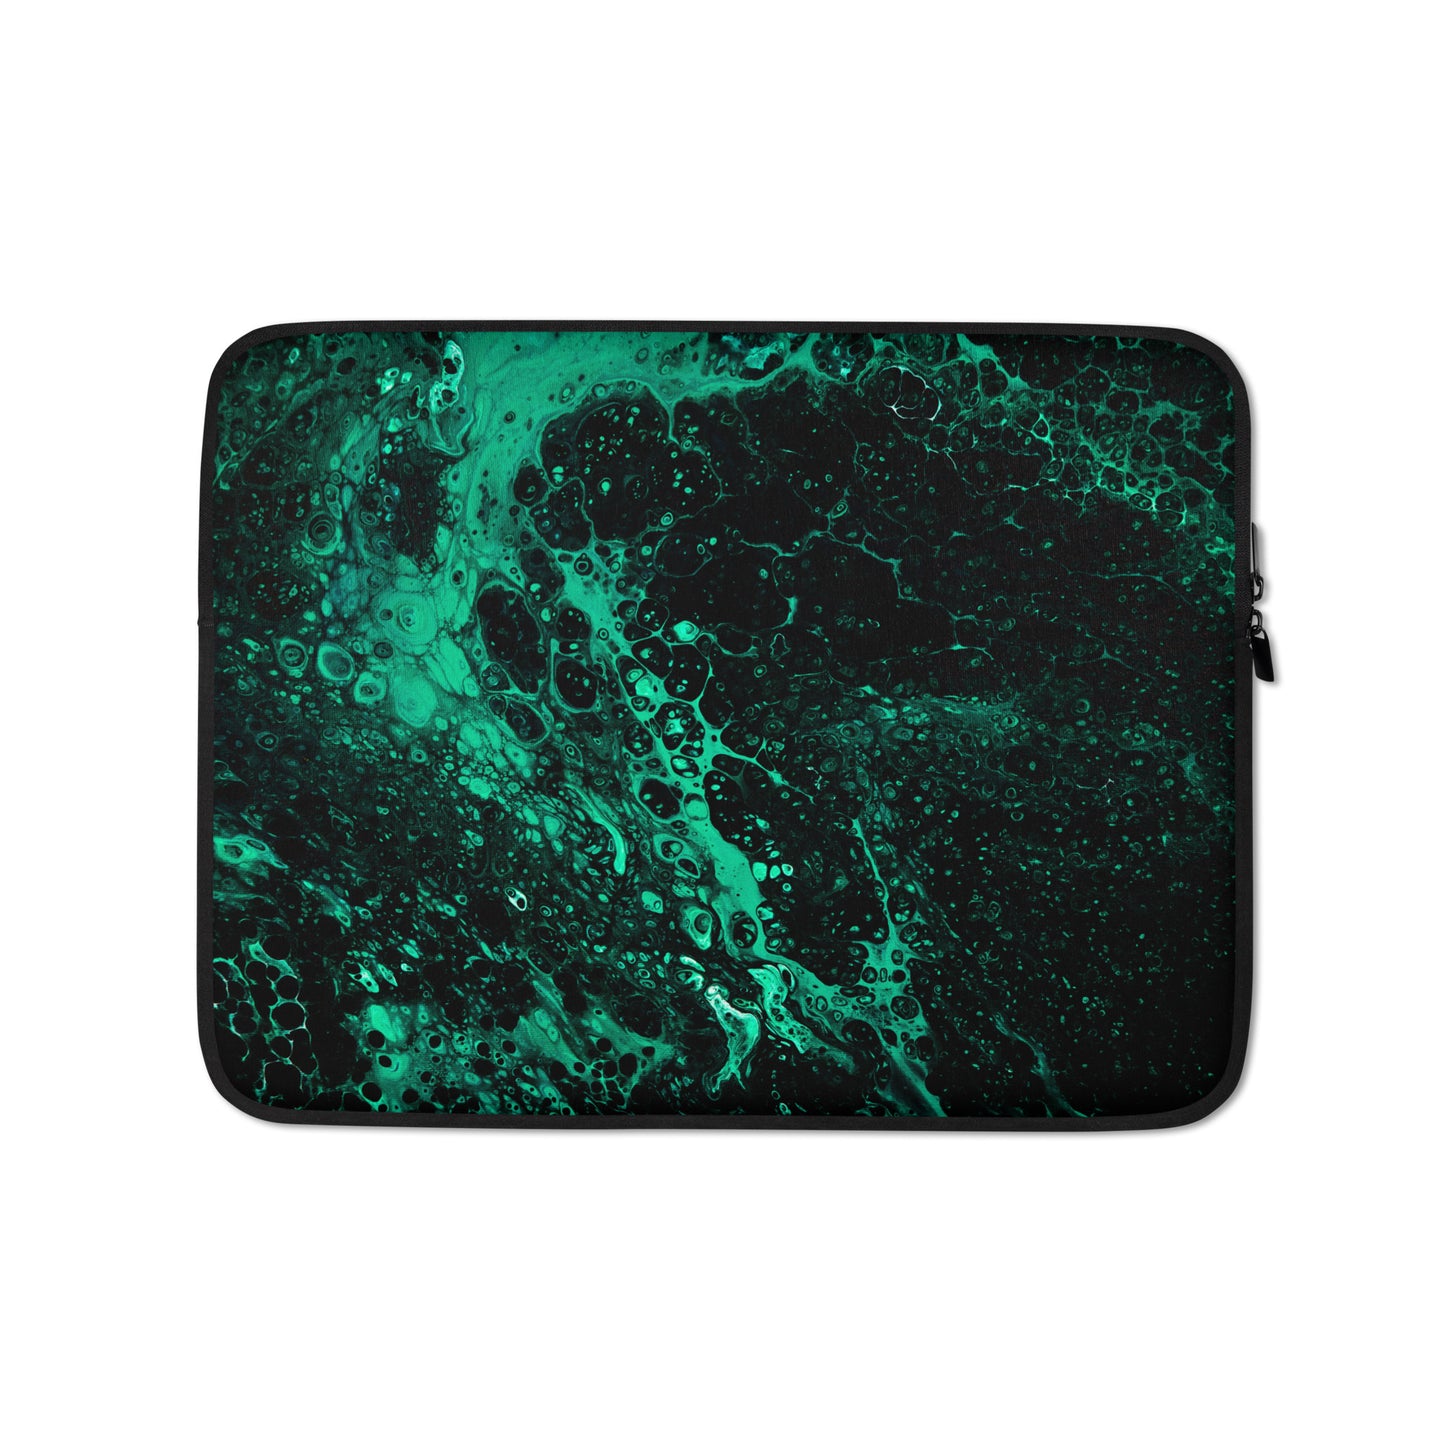 NightOwl Studio Padded Laptop Sleeve with Faux Fur Lining, 13 and 15 Inch Covers for Portable Computers and Large Tablets, Slim and Portable Neoprene for Work, Travel, or Gaming, Green Tide